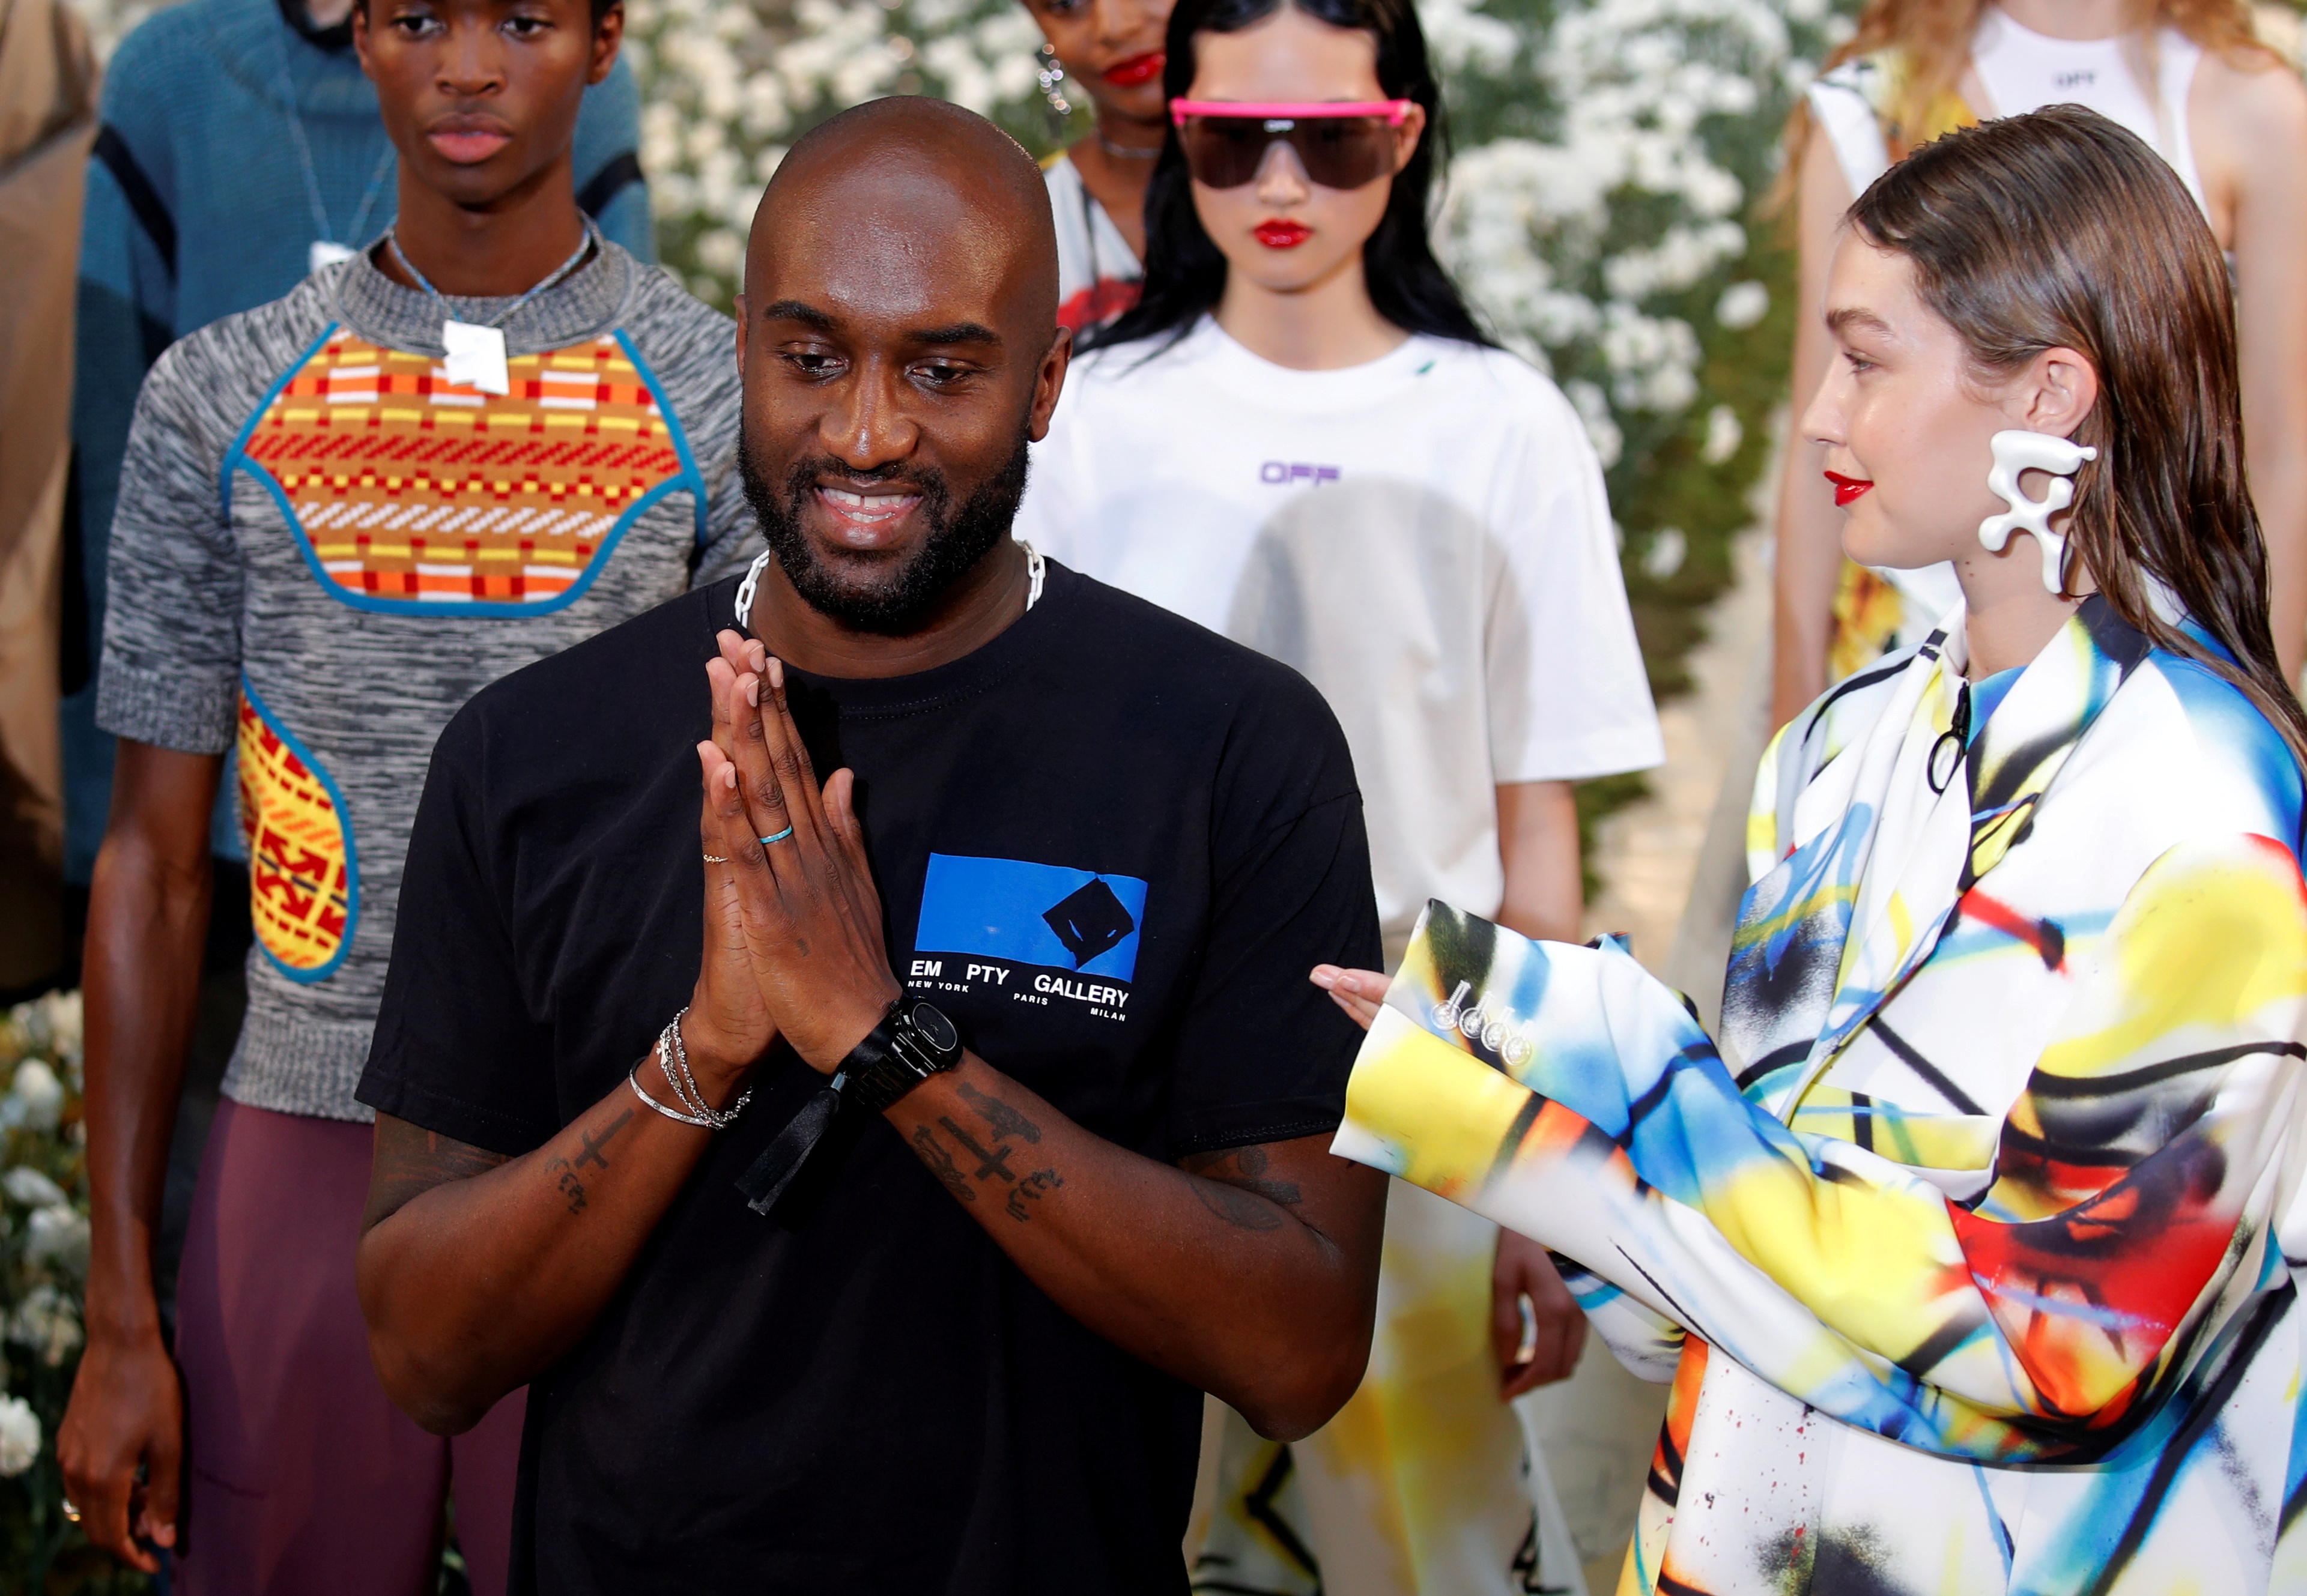 Designer Virgil Abloh appears with model Gigi Hadid at the end of his Spring/Summer 2020 collection show for his label Off-White during Men's Fashion Week in Paris, France, June 19, 2019. REUTERS/Charles Platiau